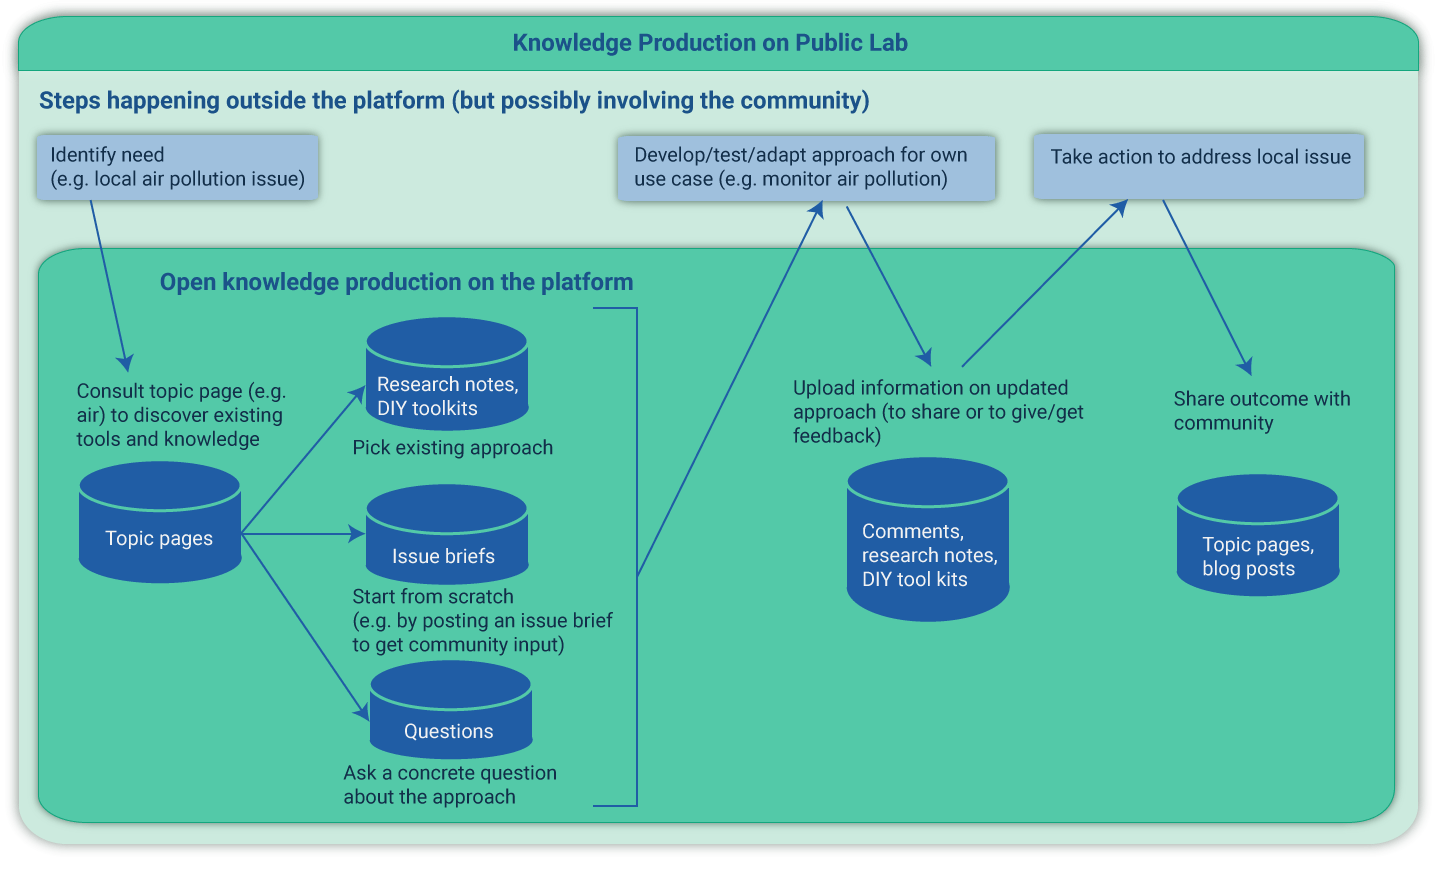 A 
  knowledge production flow consisting of seven steps: 1) Outside the platform: Identify need (e.g. a local air pollution issue), 2) On the platform: Consult topic page (e.g. air) to discover existing topics and knowledge, 3) Pick existing approach or start from scratch (e.g. by posting an issue brief to get community input or ask a concrete question about the approach), 4) Outside the platform: Develop/test/adapt approach for own use cases (e.g. monitor air pollution), 5) On the platform: Upload information on updated approach (to share or to give/get feedback), 6) Outside the platform: Take action to address local issue, 7) On the platform: Share outcome with the community